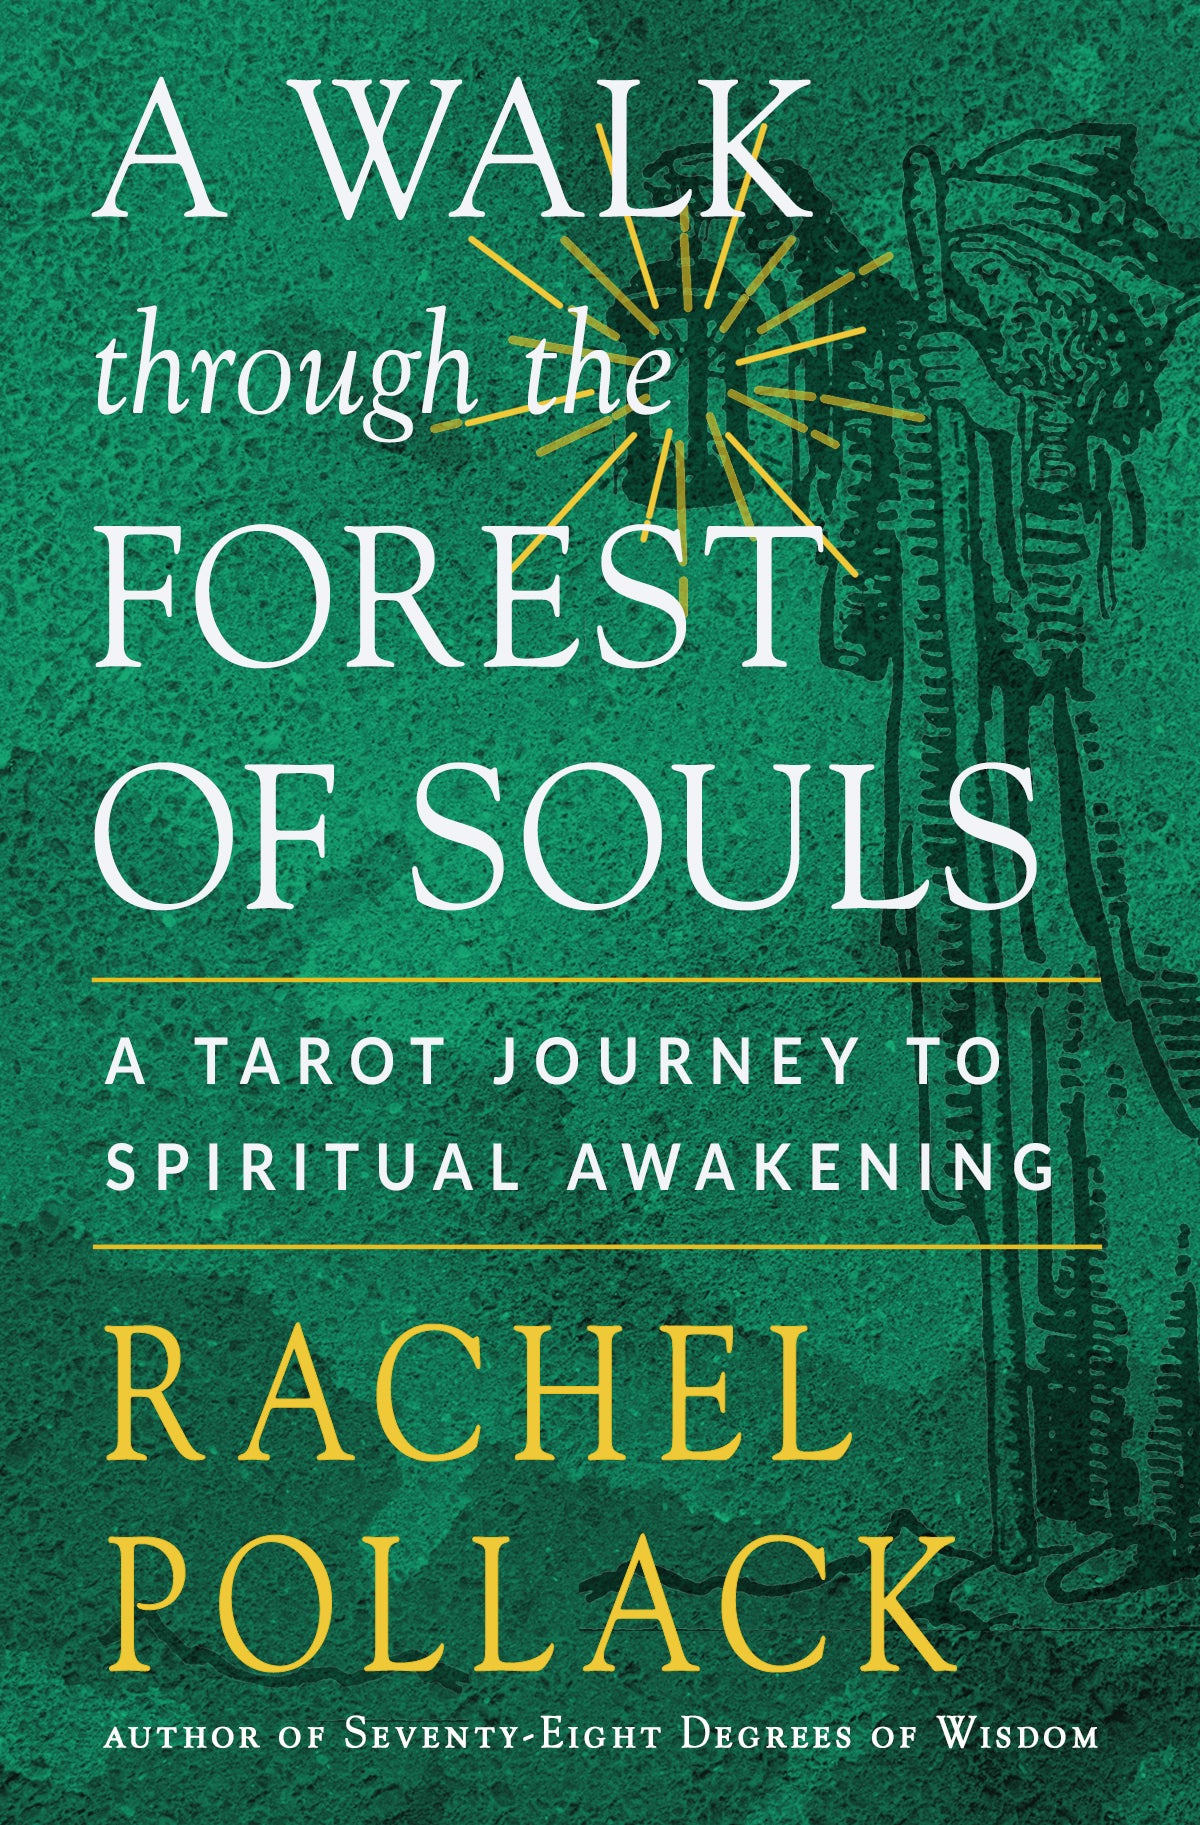 A Walk Through the Forest of Souls by Rachel Pollack